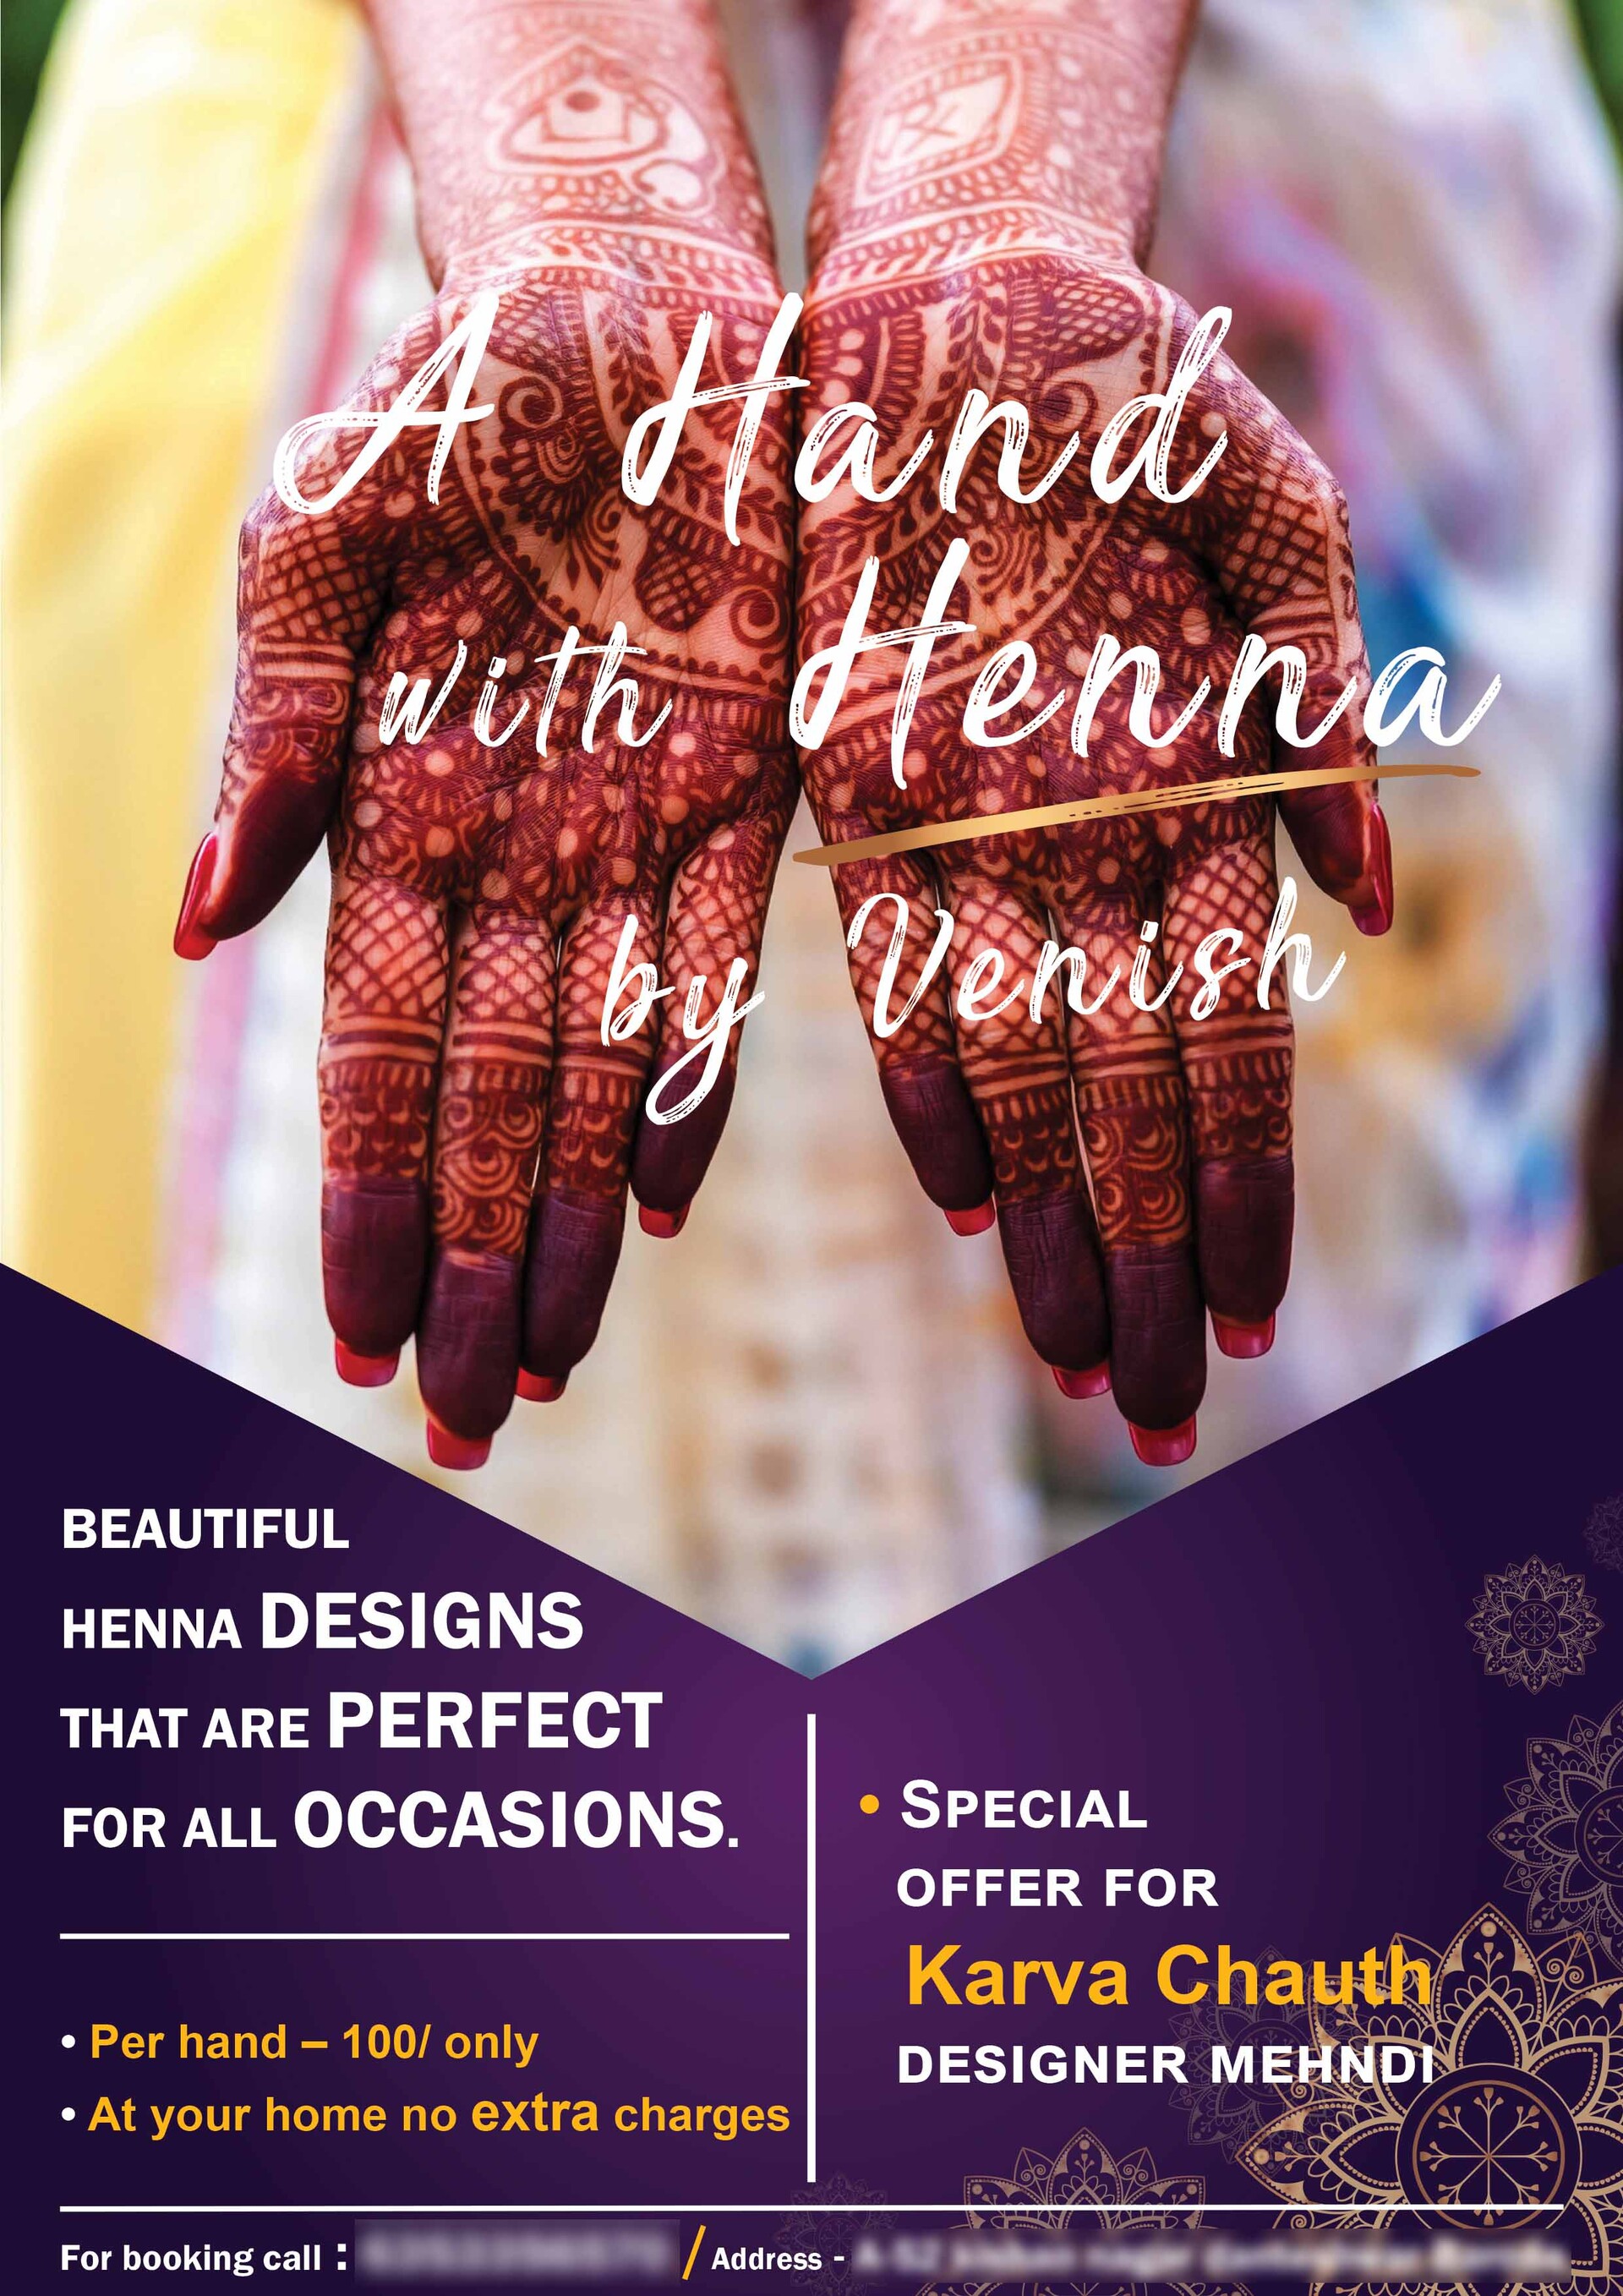 We are Happy to invite you all for joining the Mehndi ceremony - Free cards